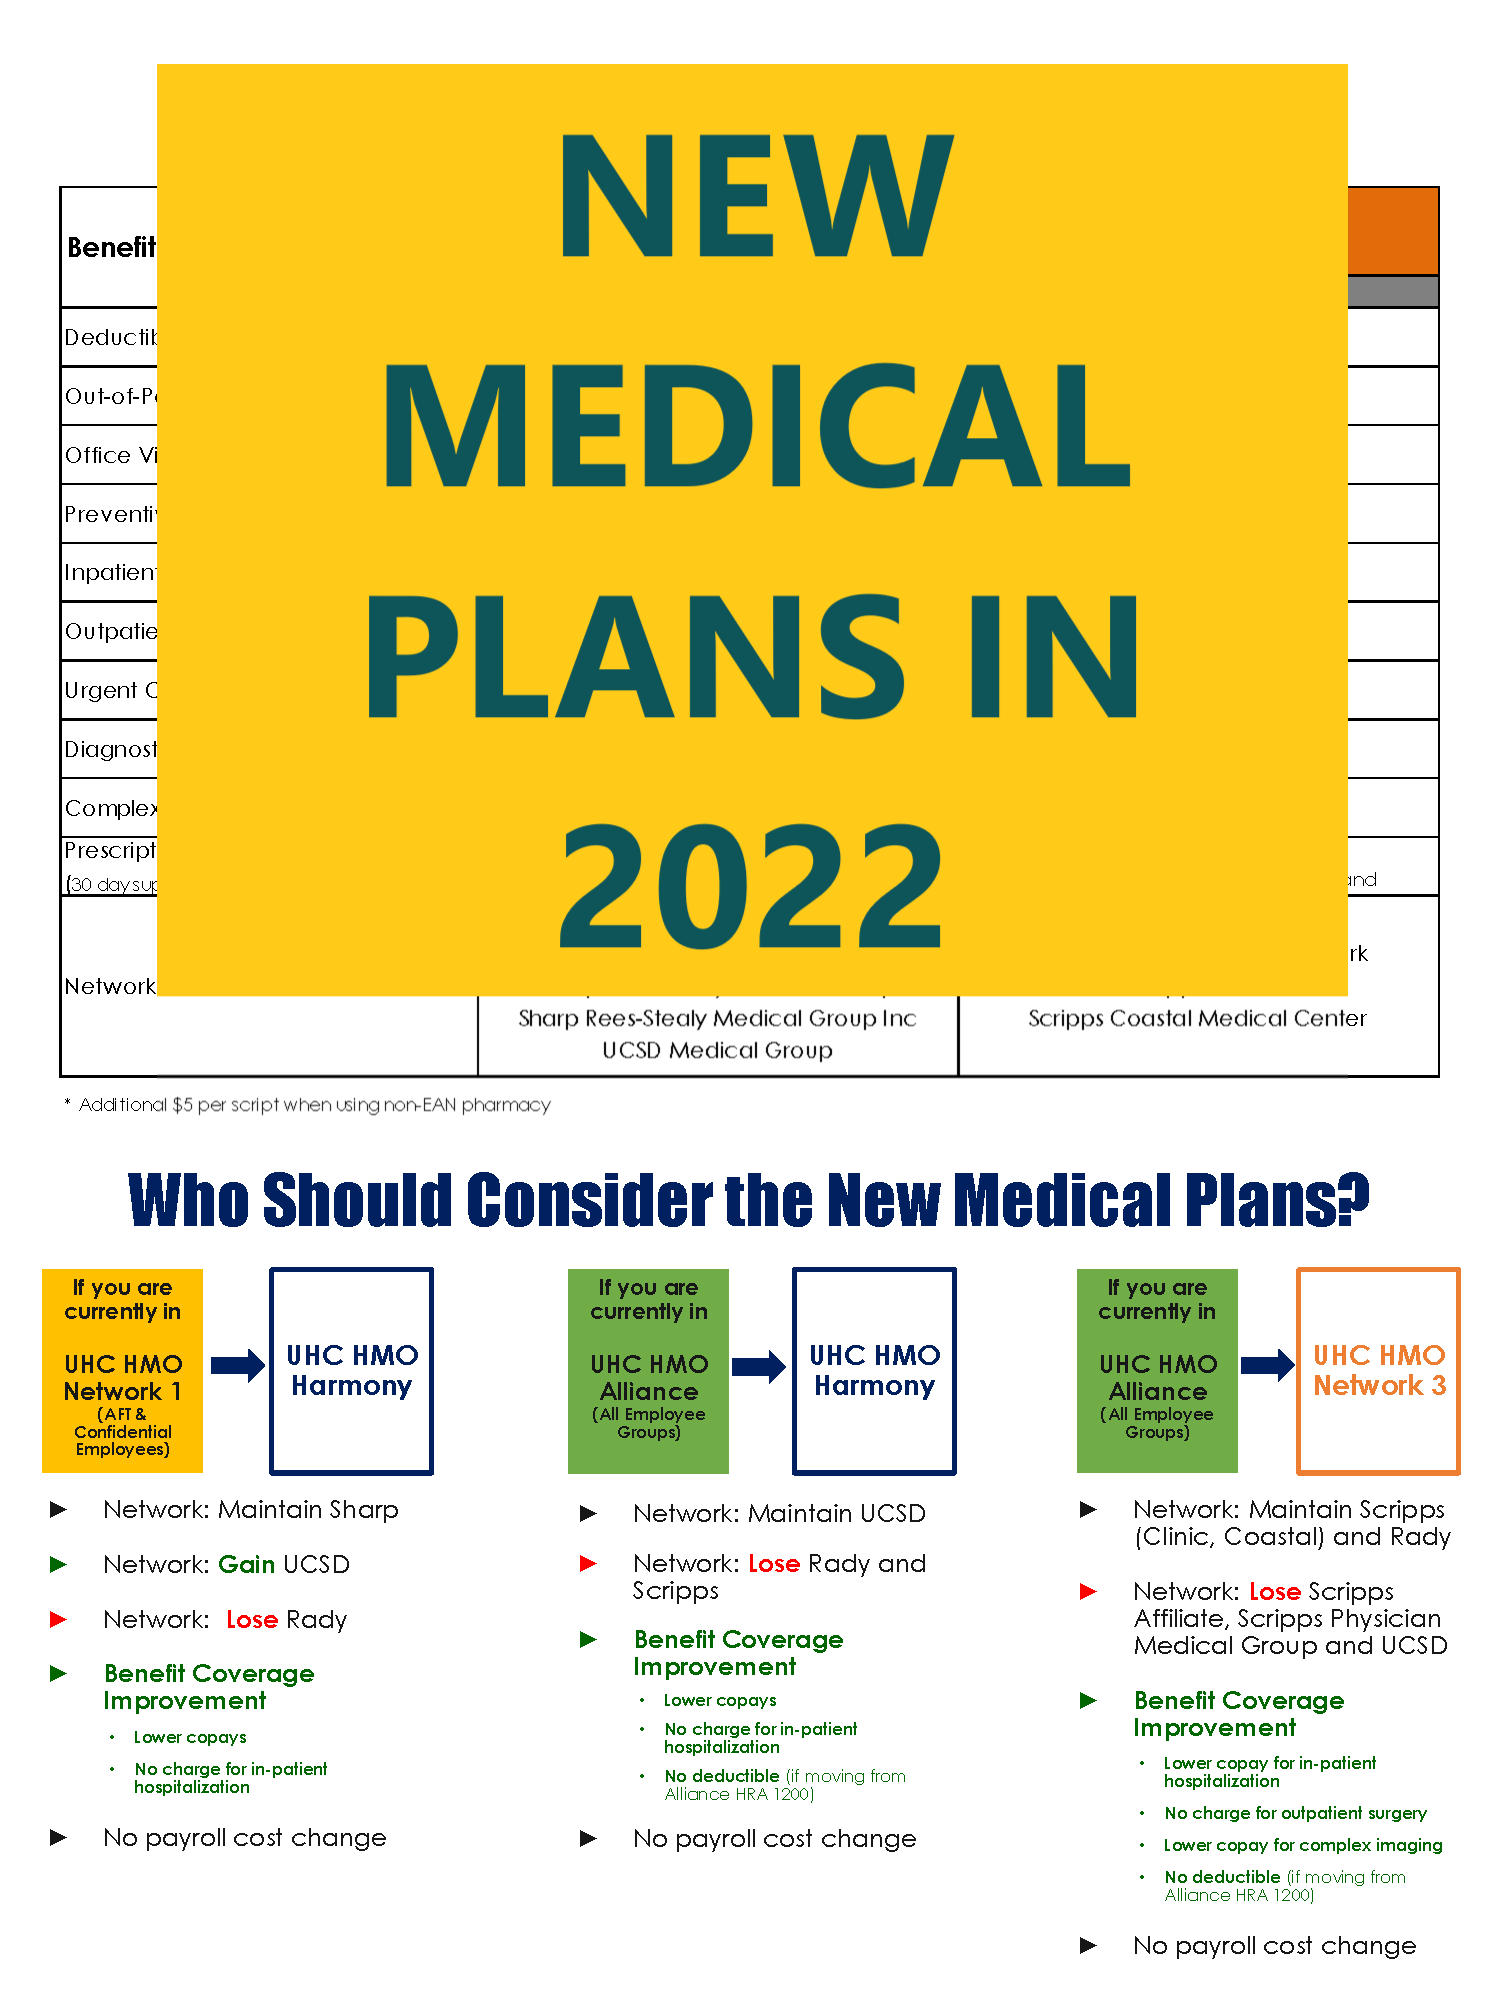 22-FLY-New-Medical-Plans-in-2022B.png